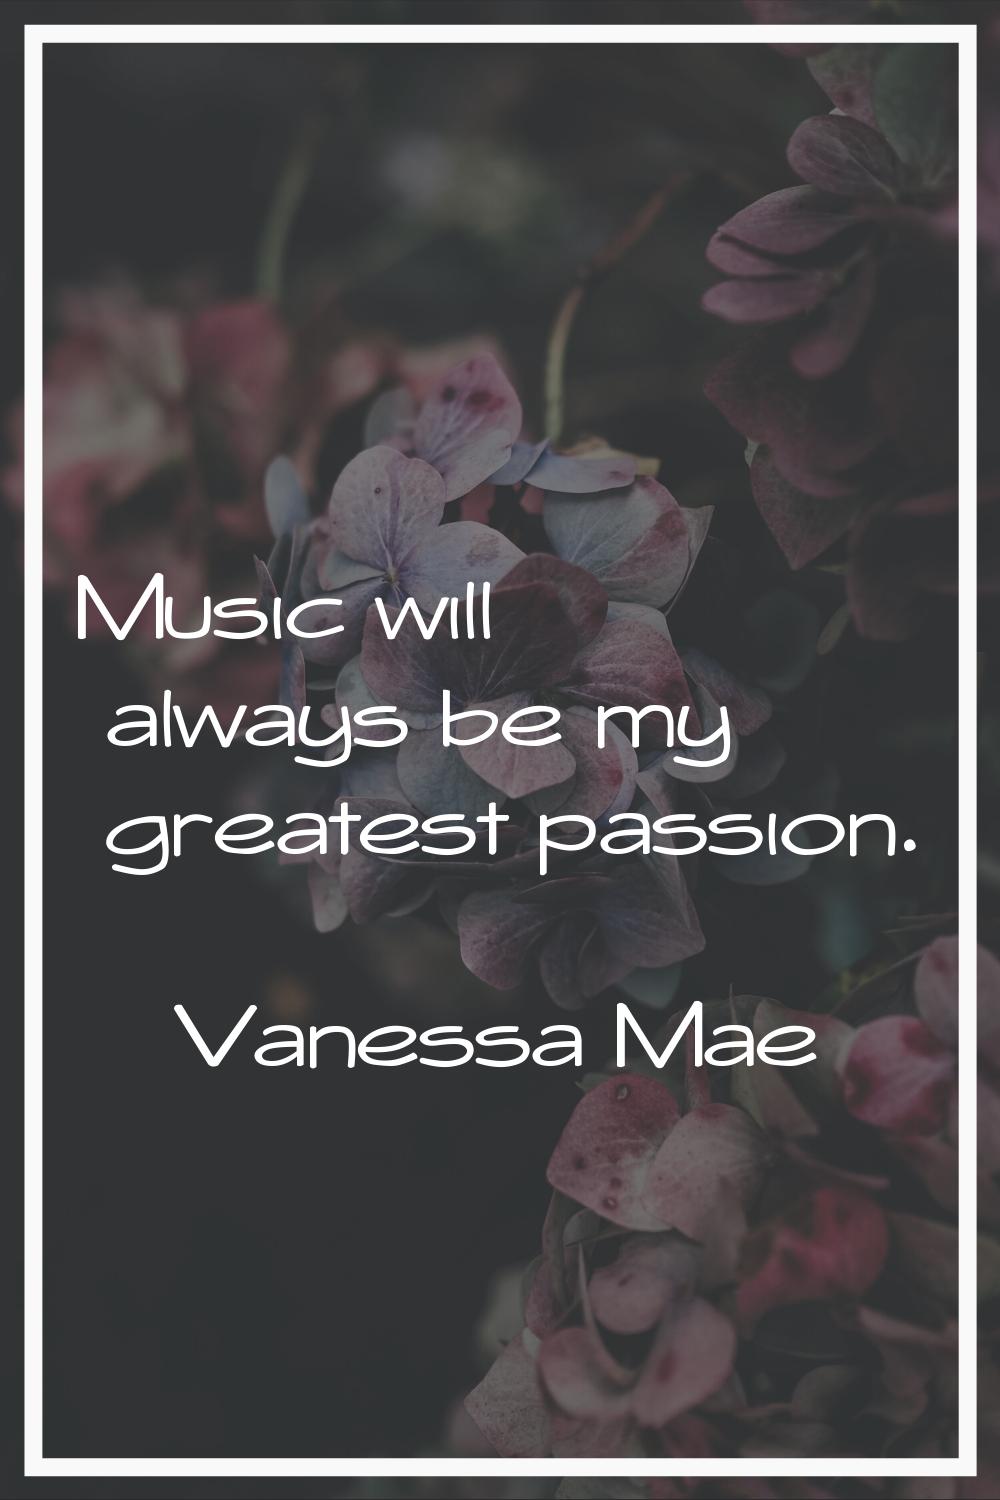 Music will always be my greatest passion.